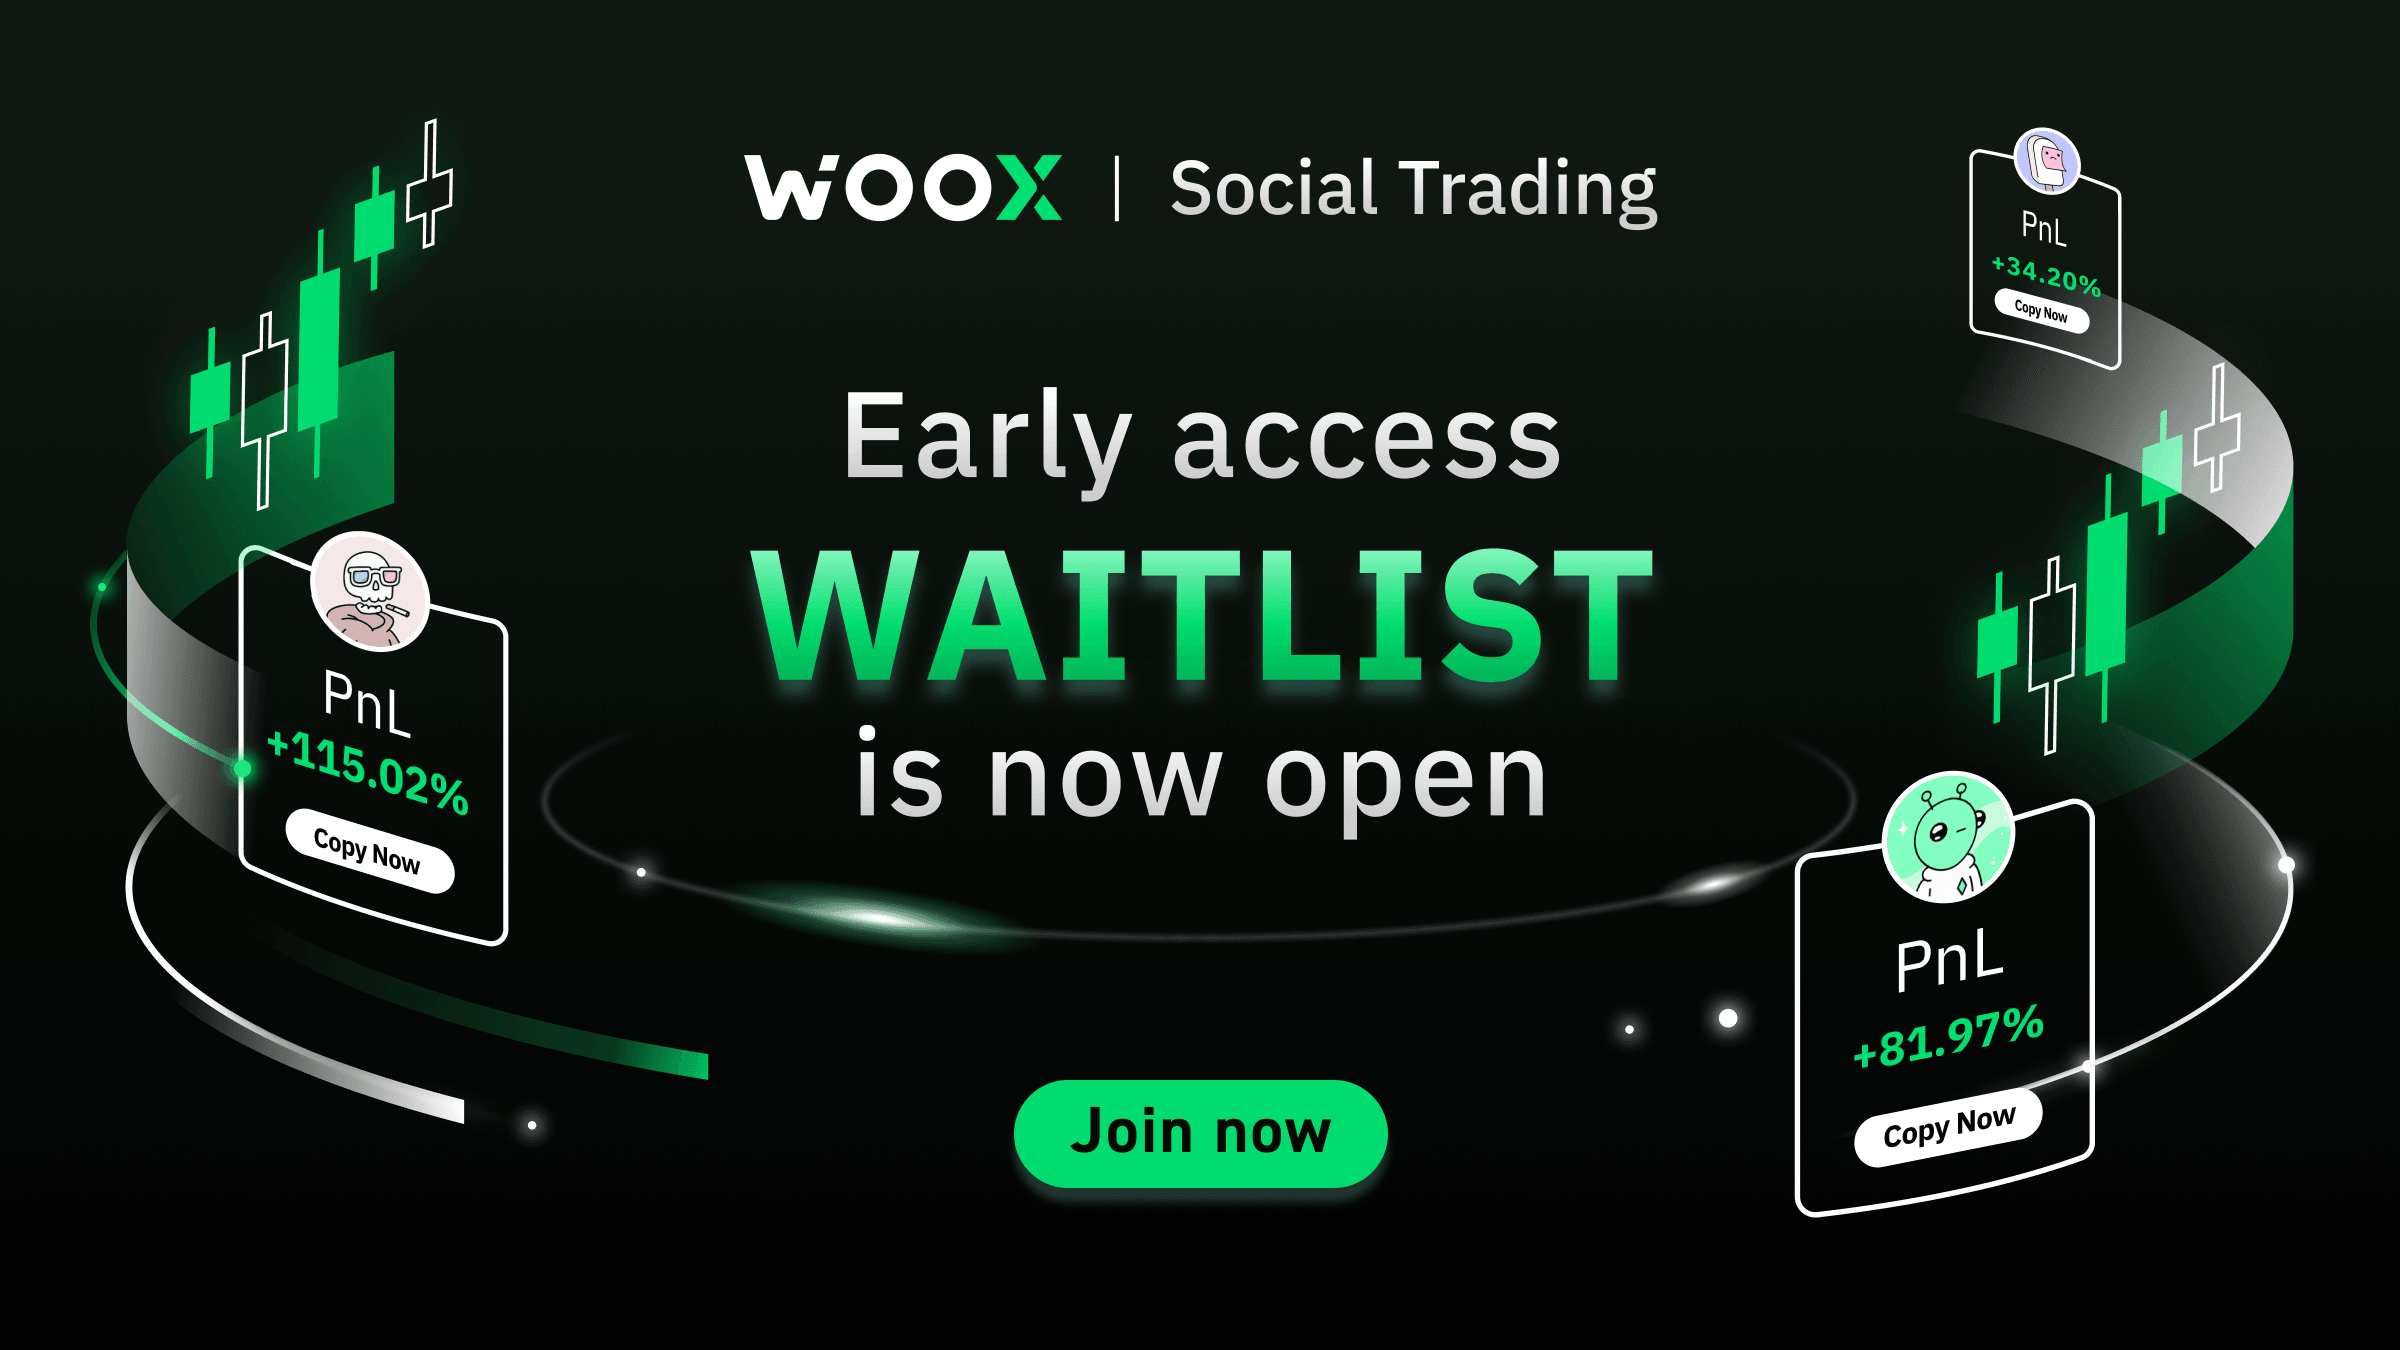 Introducing WOO X Social Trading - Join the Early Access Waitlist